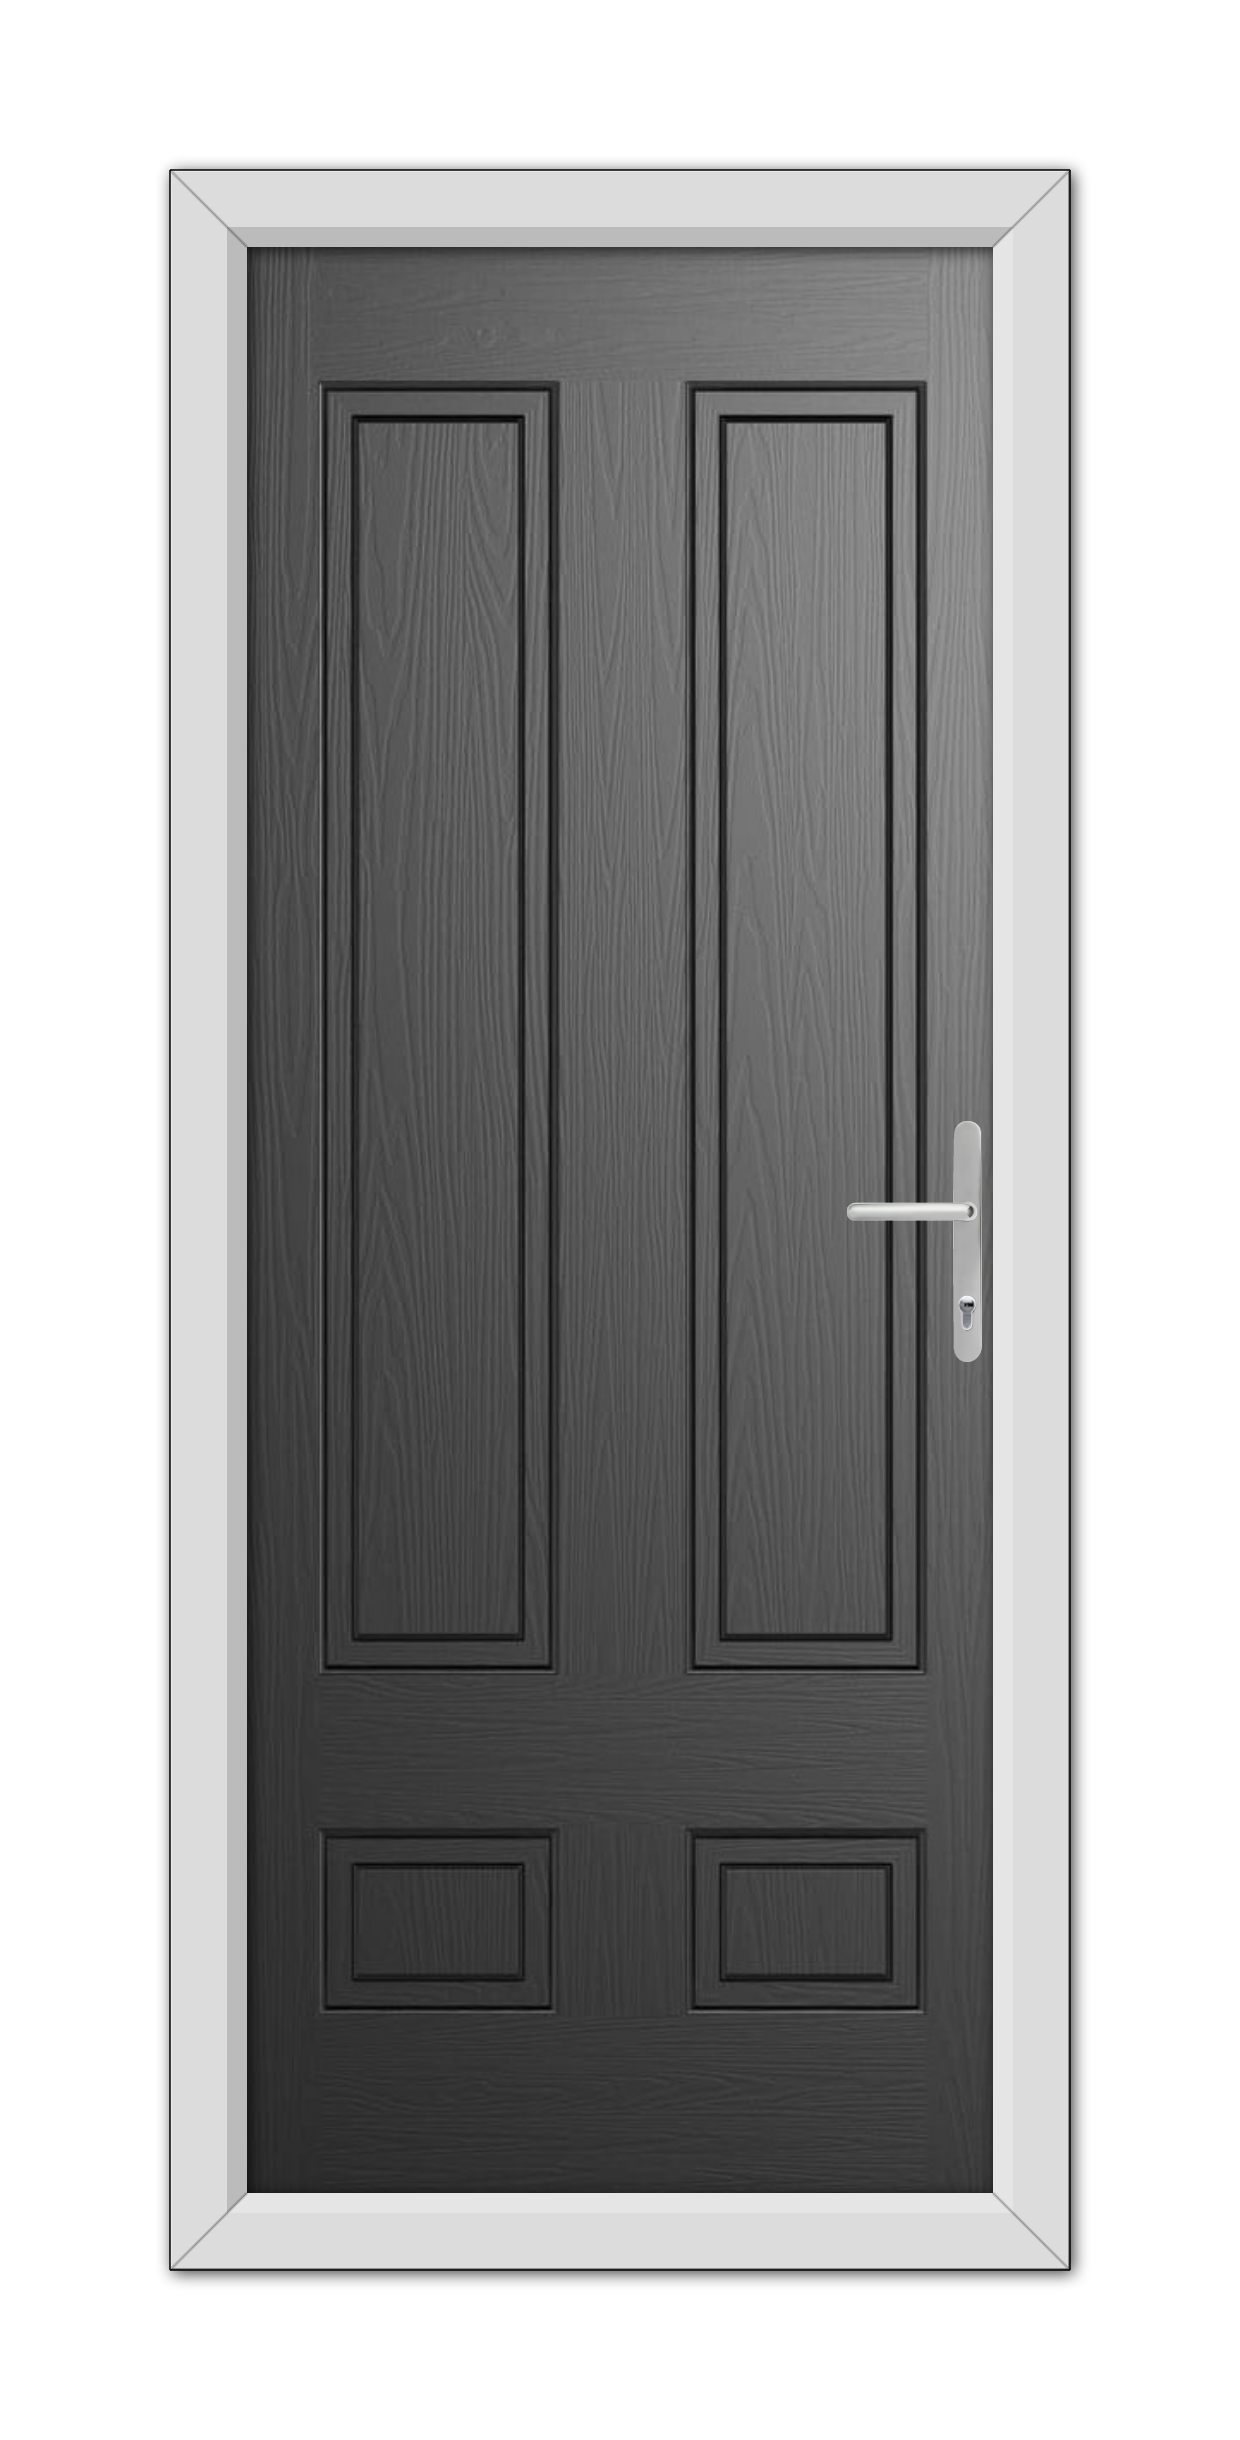 A modern double door in Black Aston Solid Composite Door 48mm Timber Core with a metal handle, framed by a white doorframe, depicted against a white background.